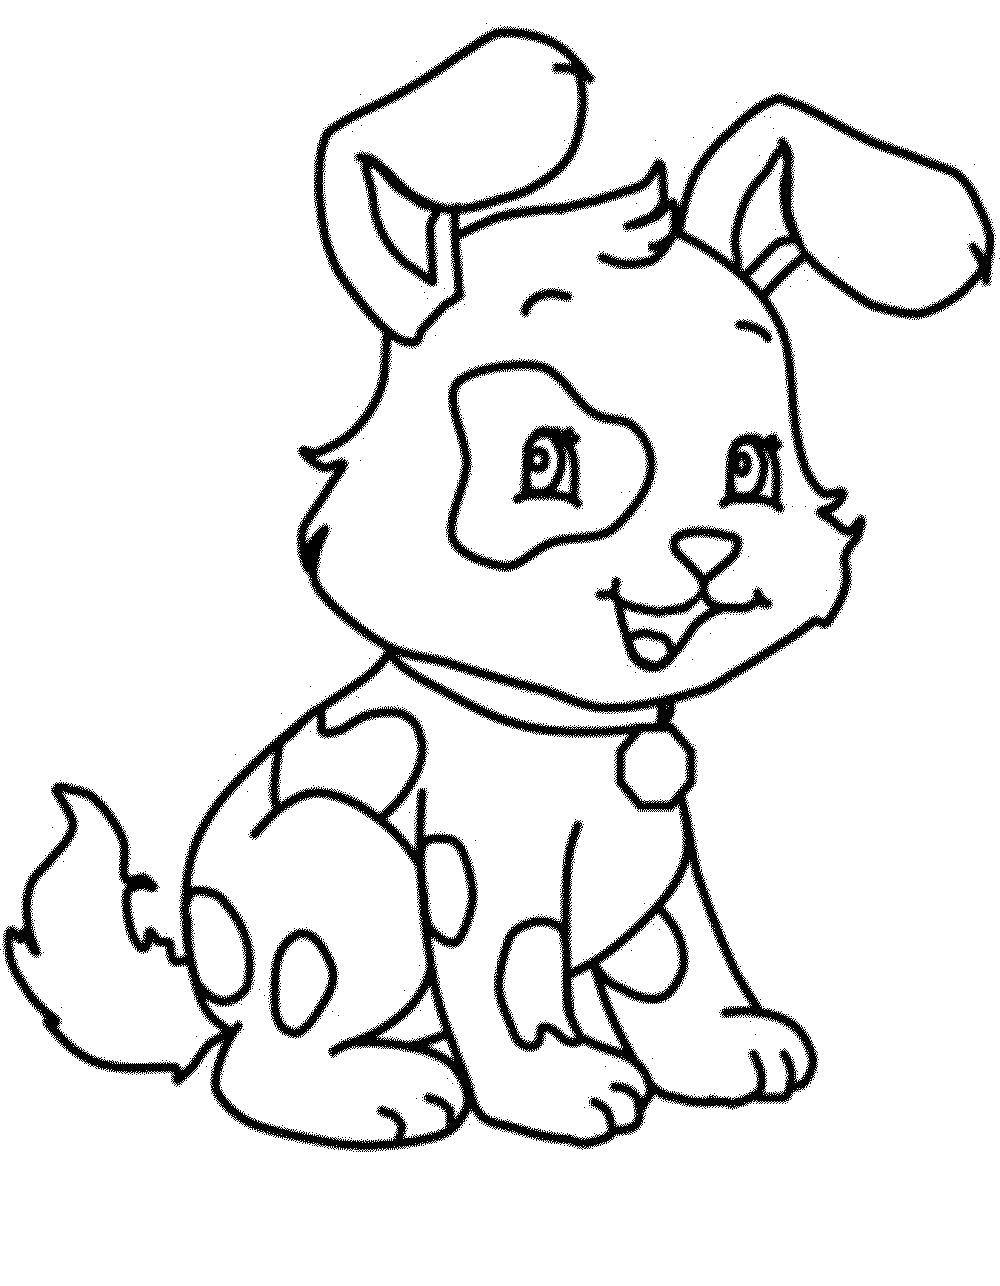 Coloring The puppy in the spot and collar. Category dogs. Tags:  puppy, dog, ears.